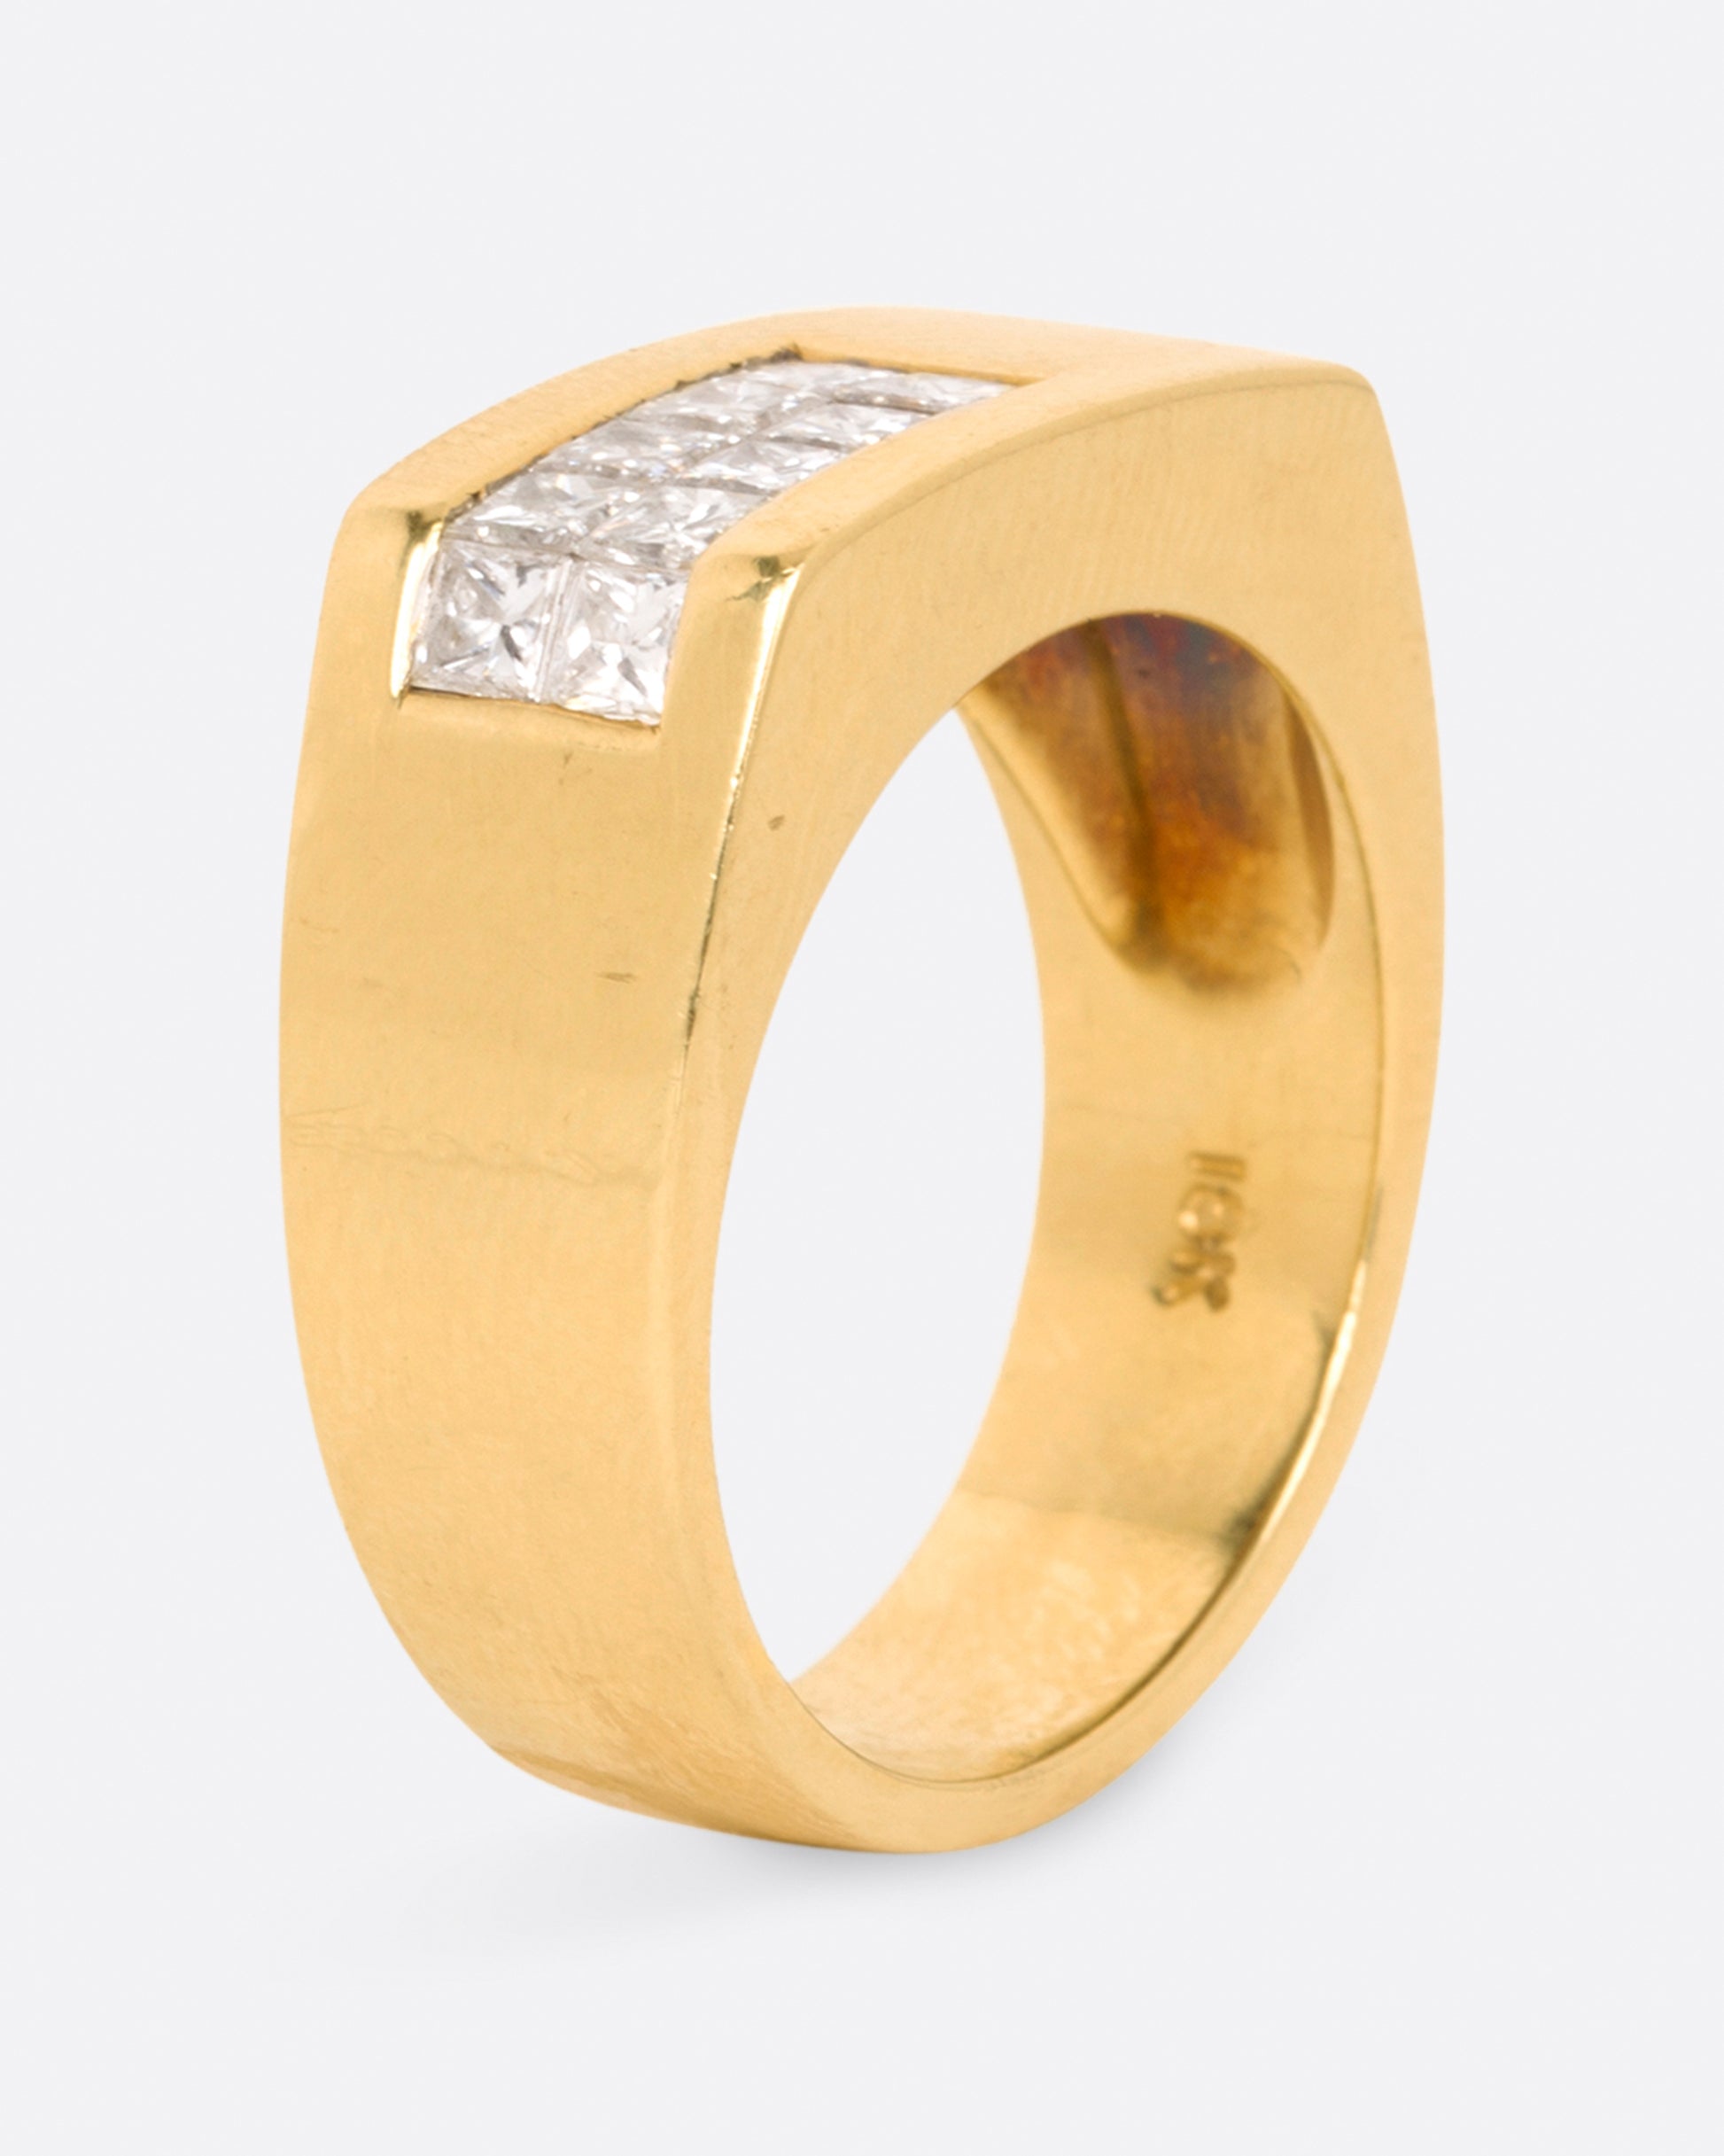 A yellow gold rectangular signet ring with 10 princess cut diamonds on one corner, shown standing up, from the side.